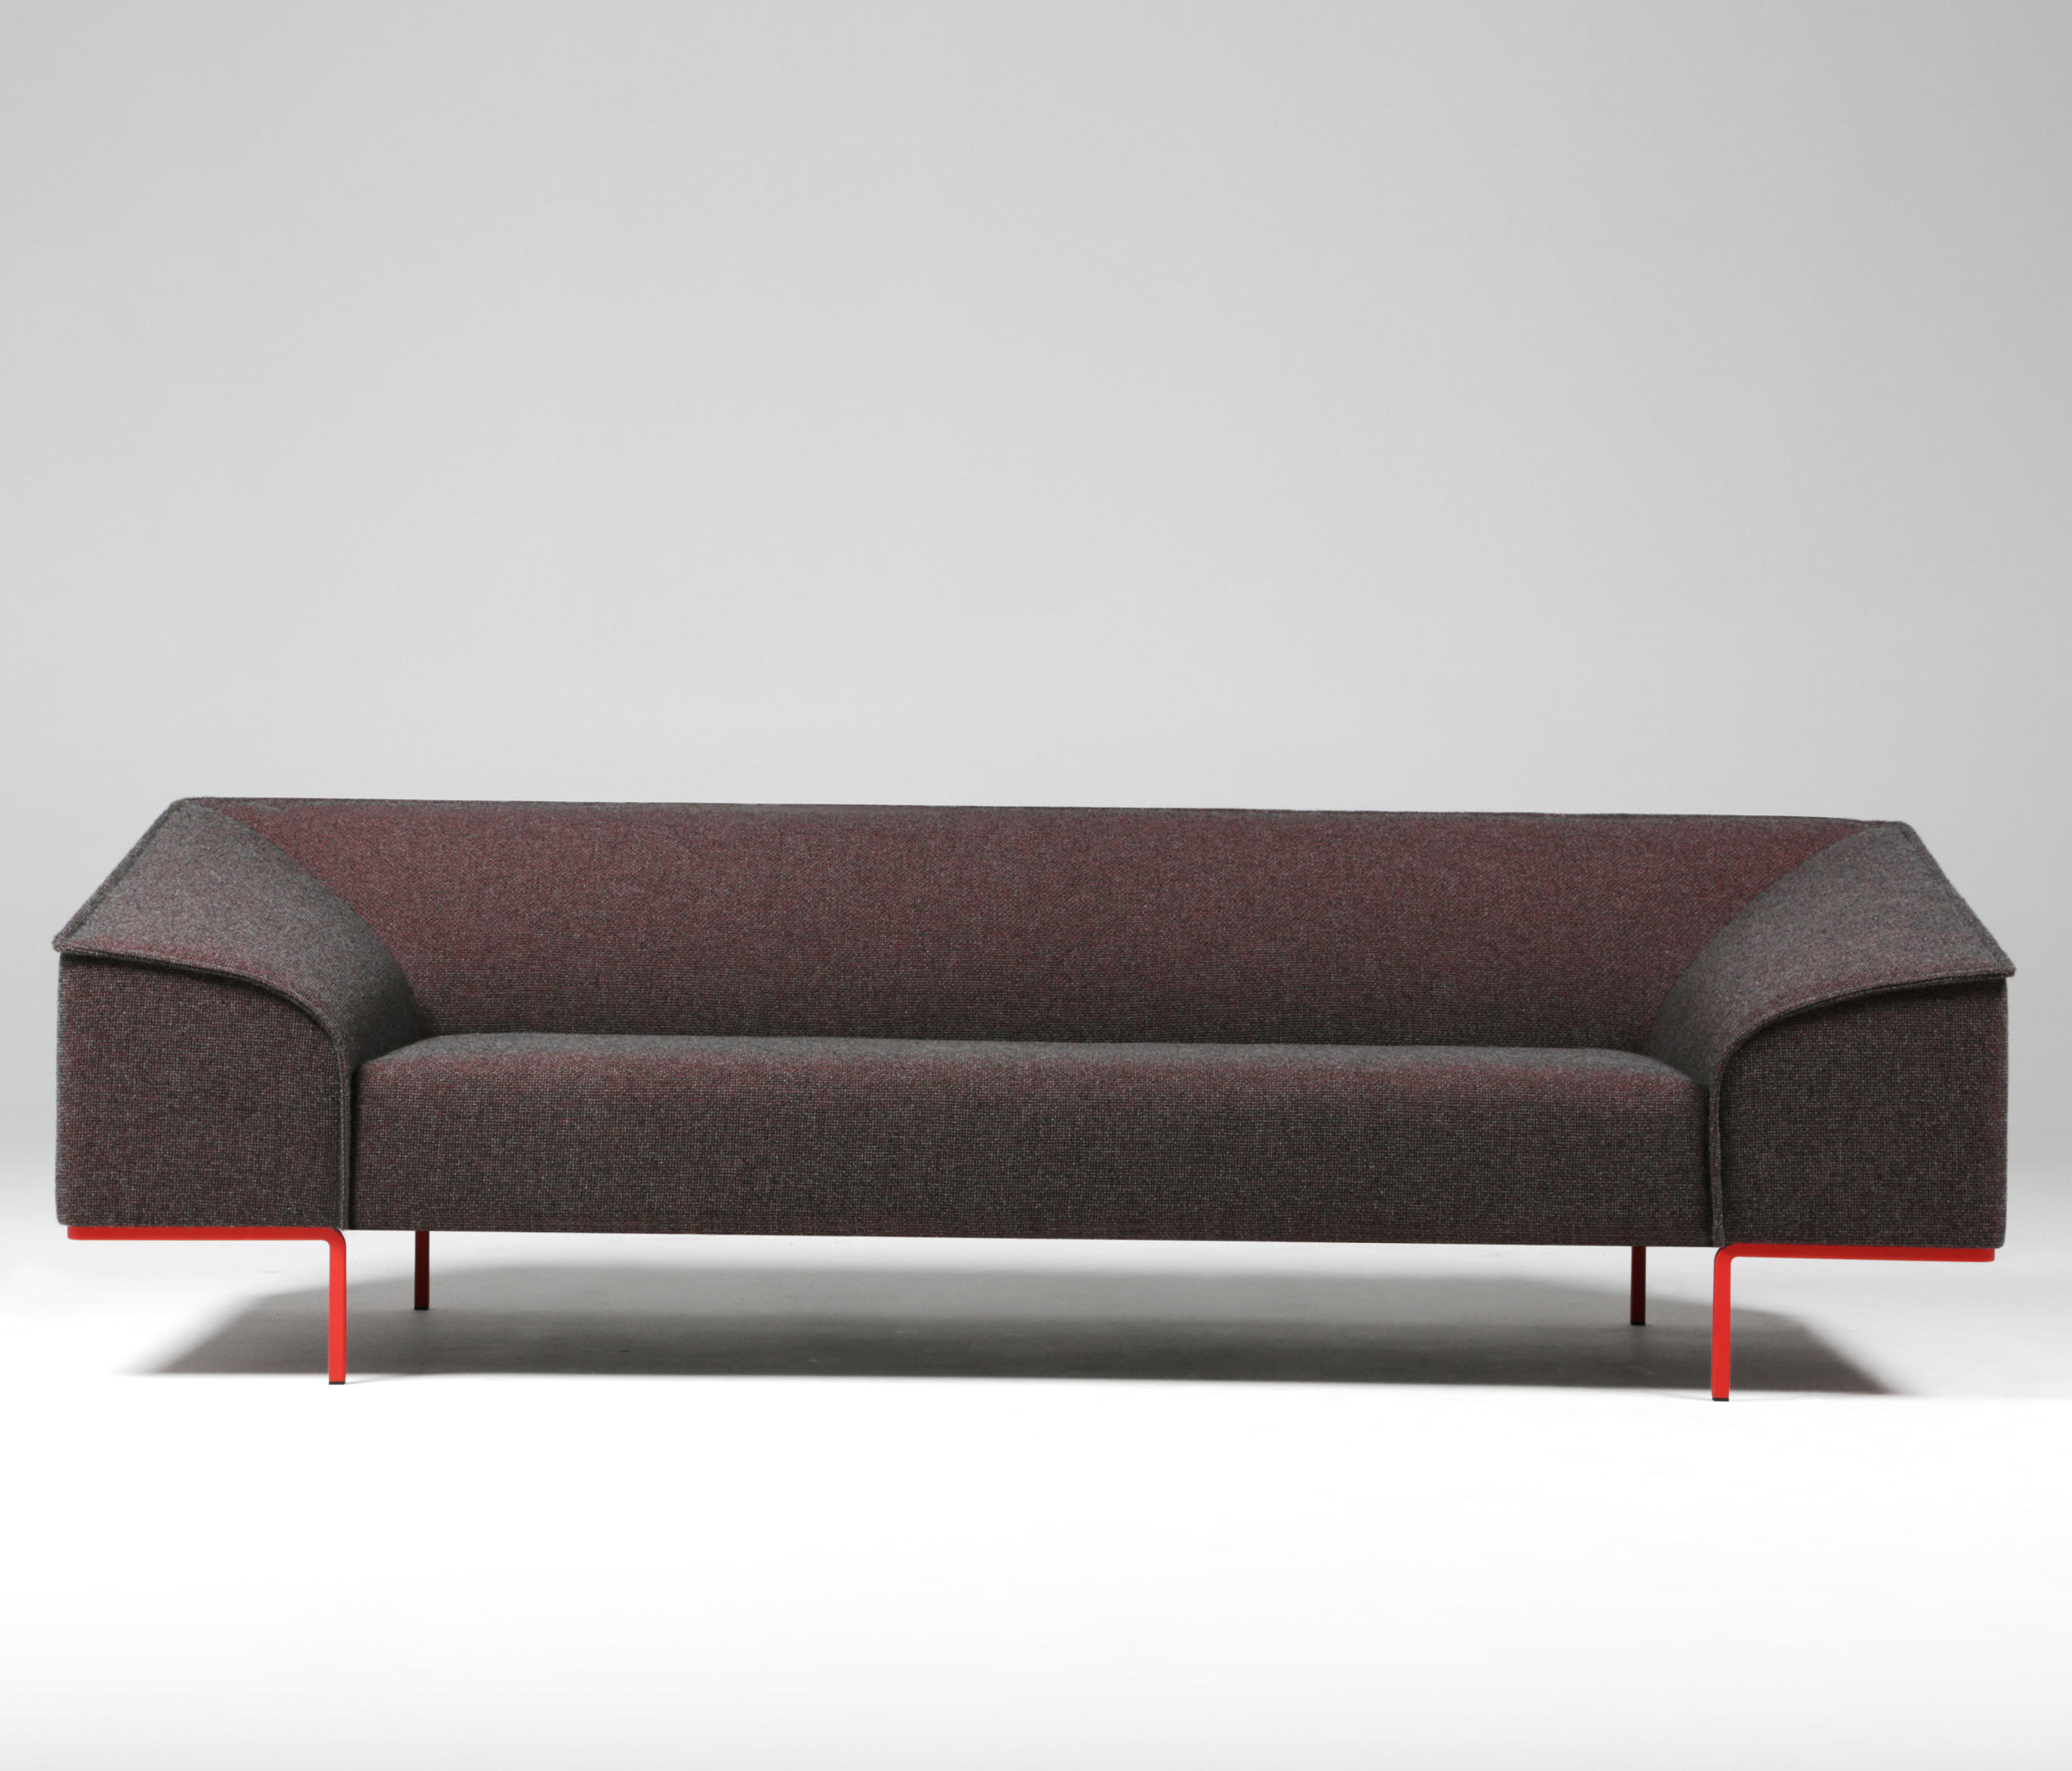 Seam Seating Collection by Prostoria